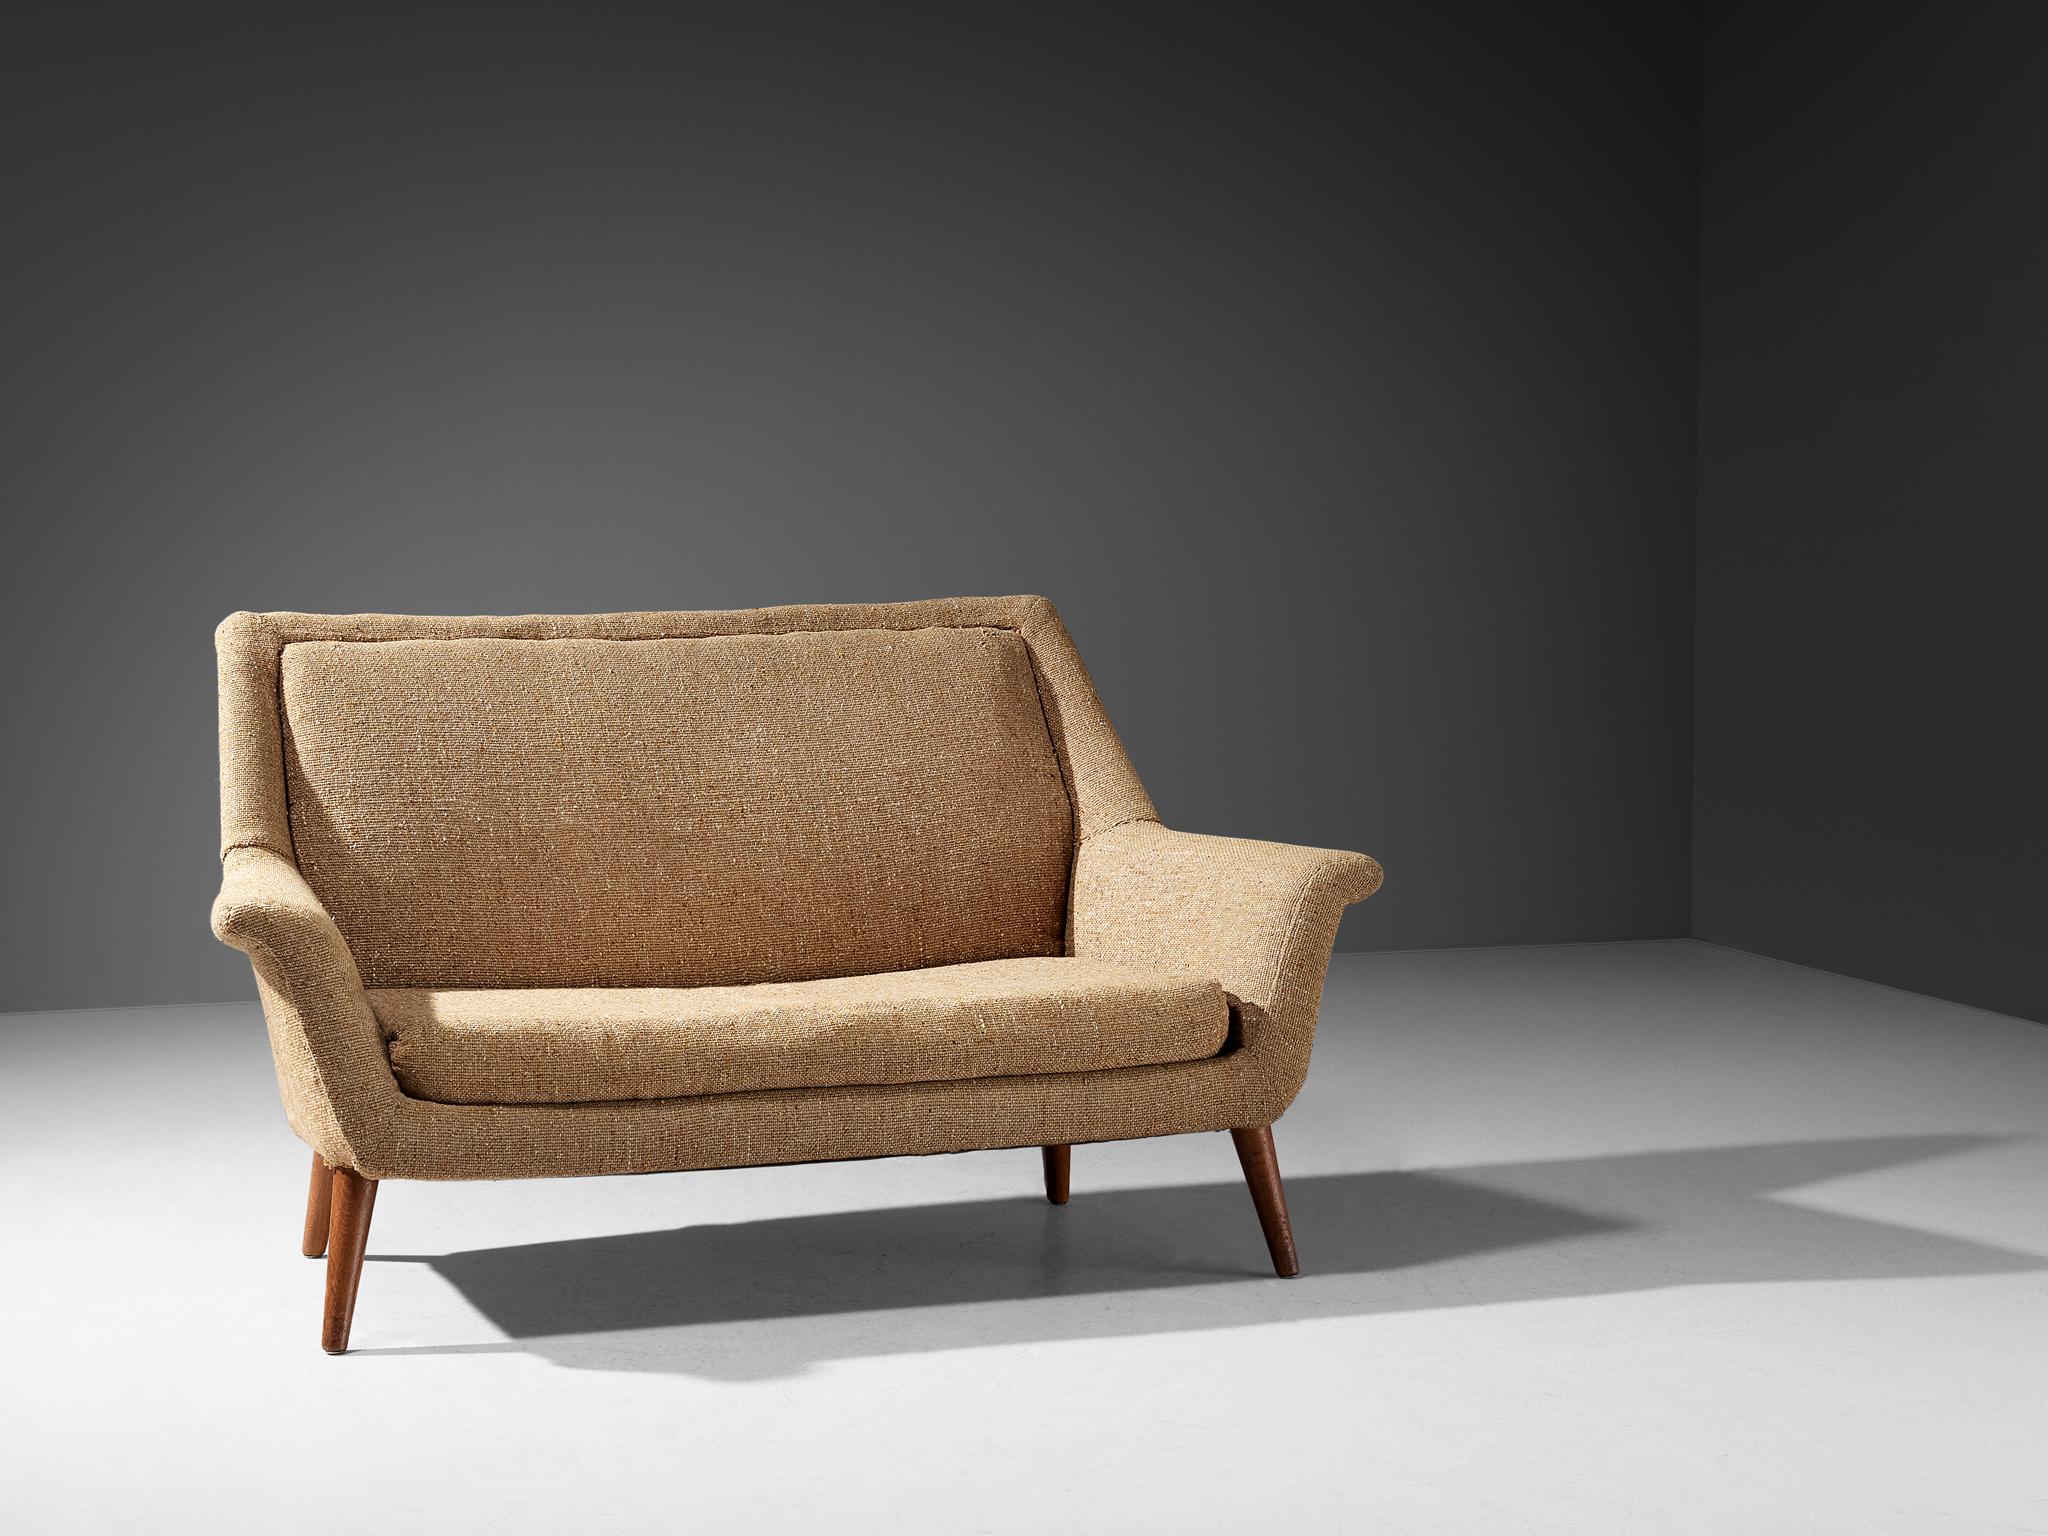 English Mid-Century Modern Sofa in Beige Wool and Teak  For Sale 2